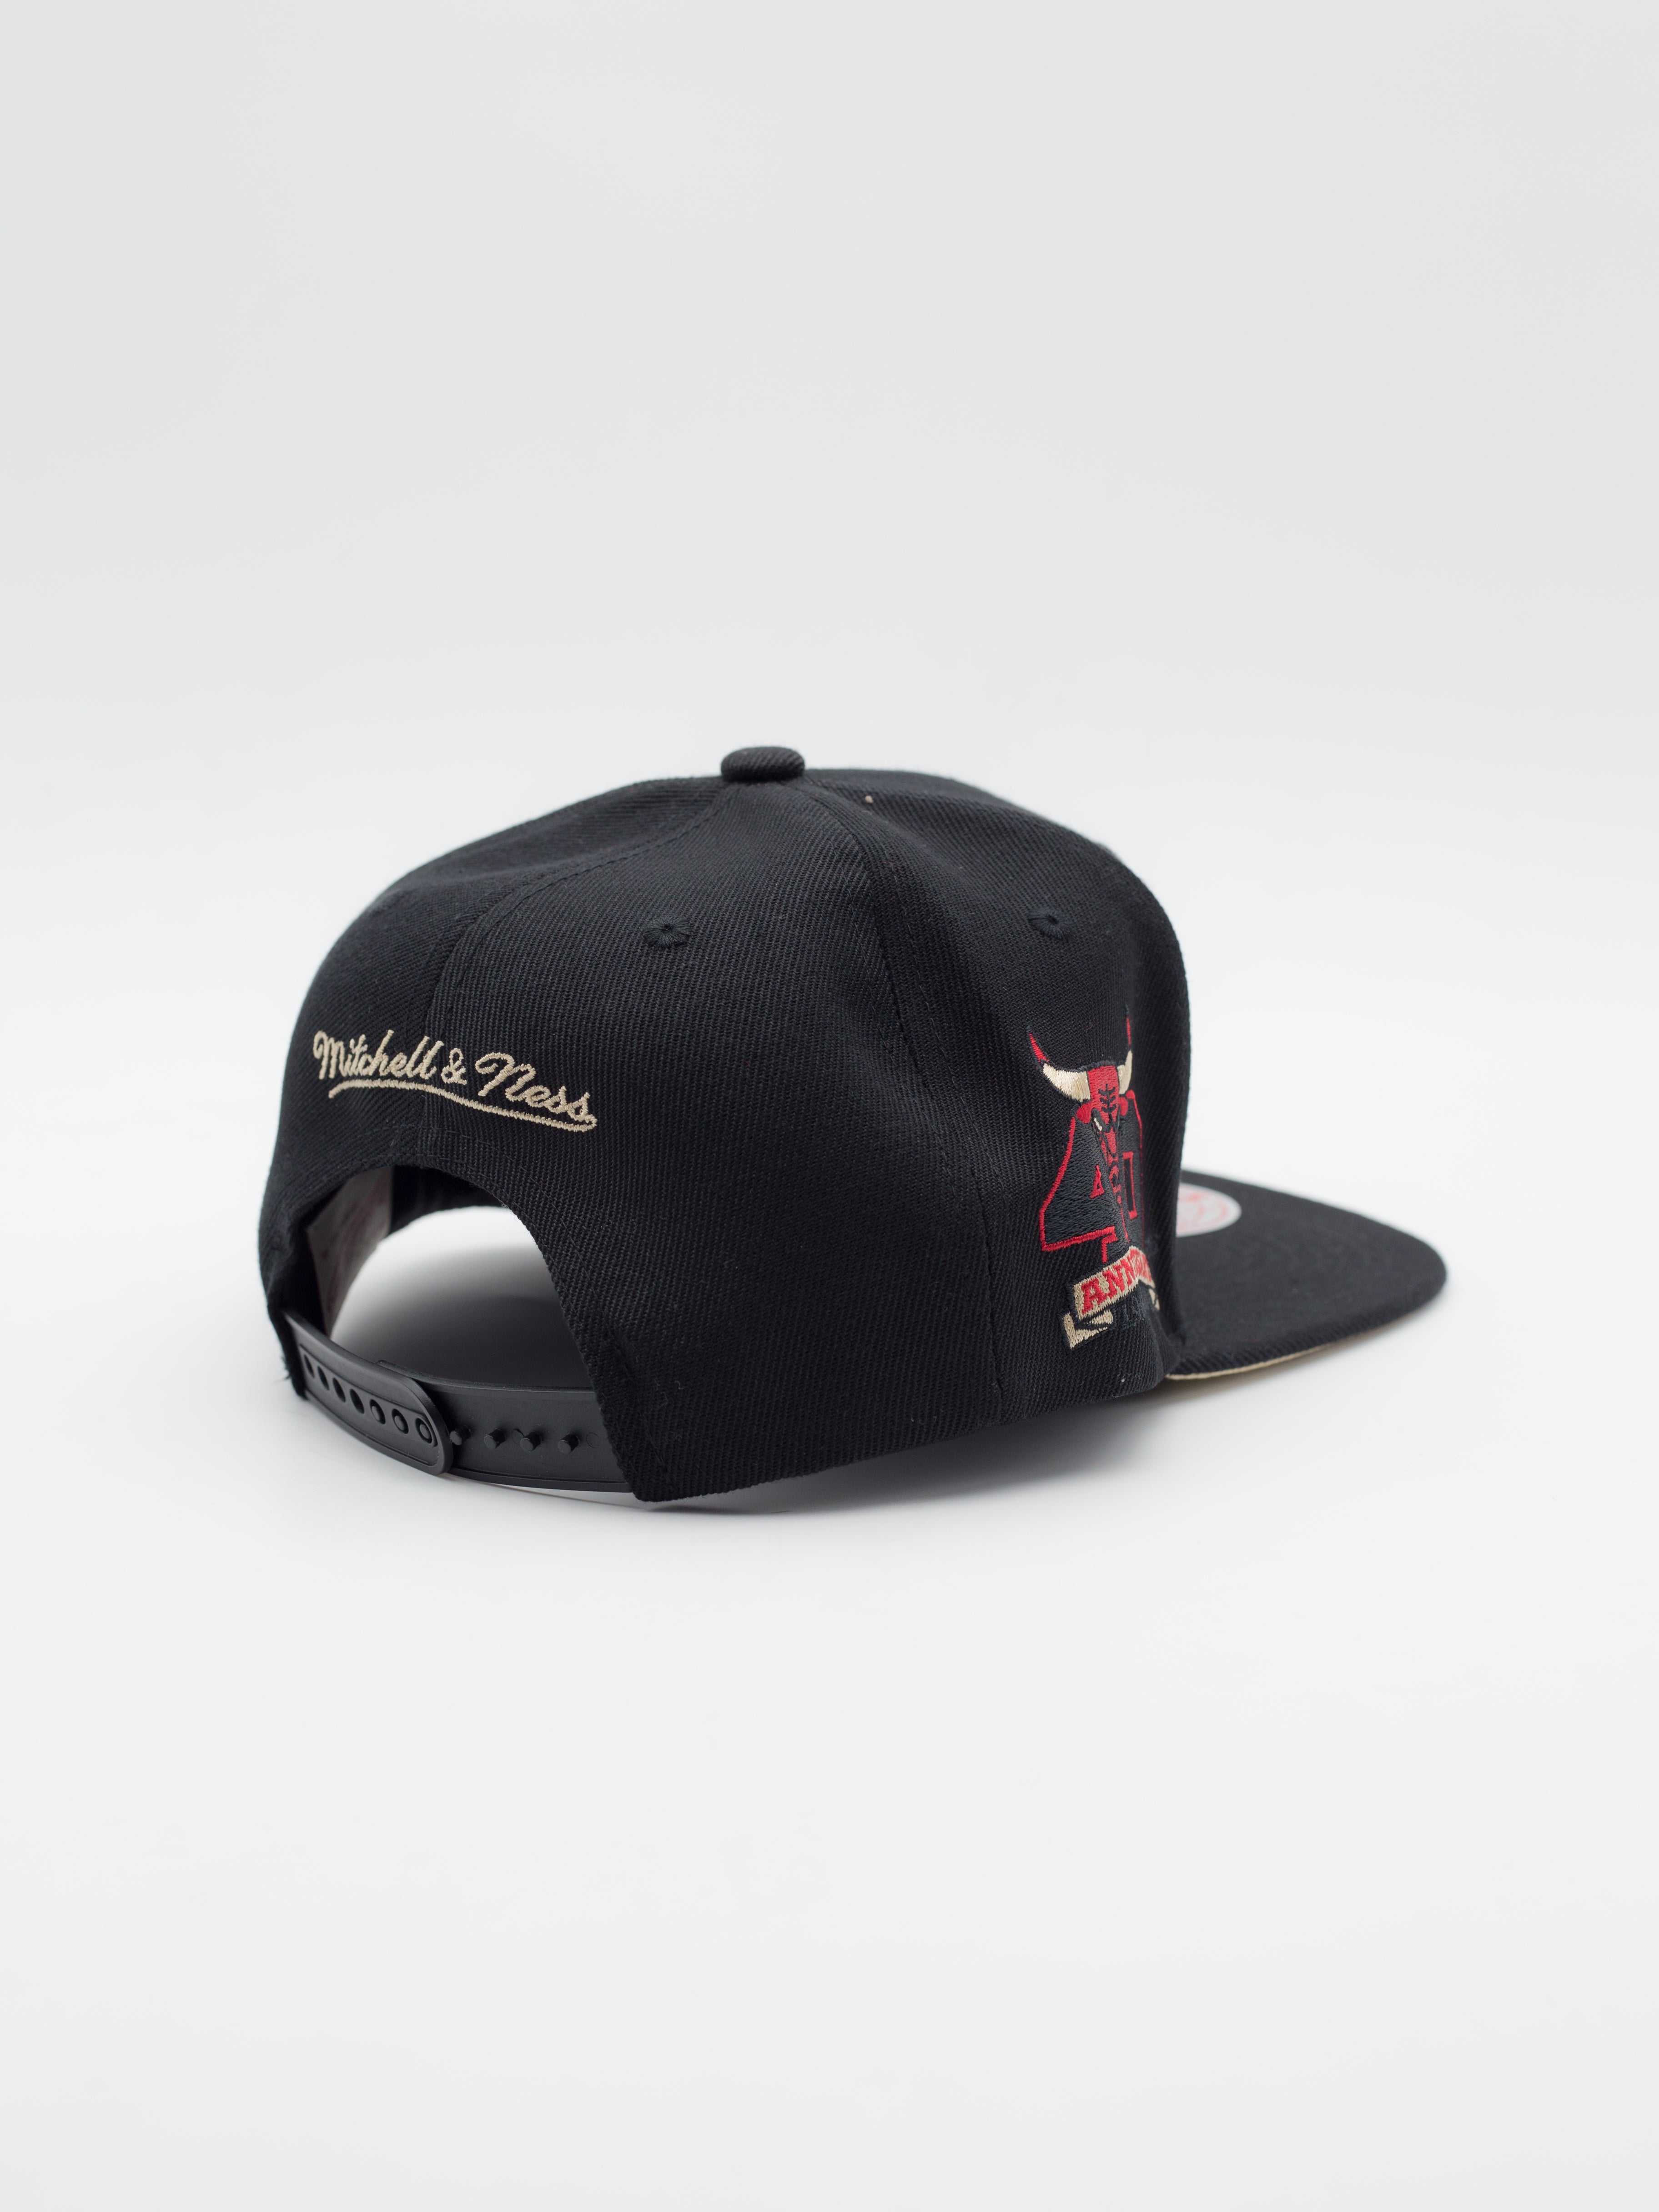 With Love Chicago Bulls Snapback